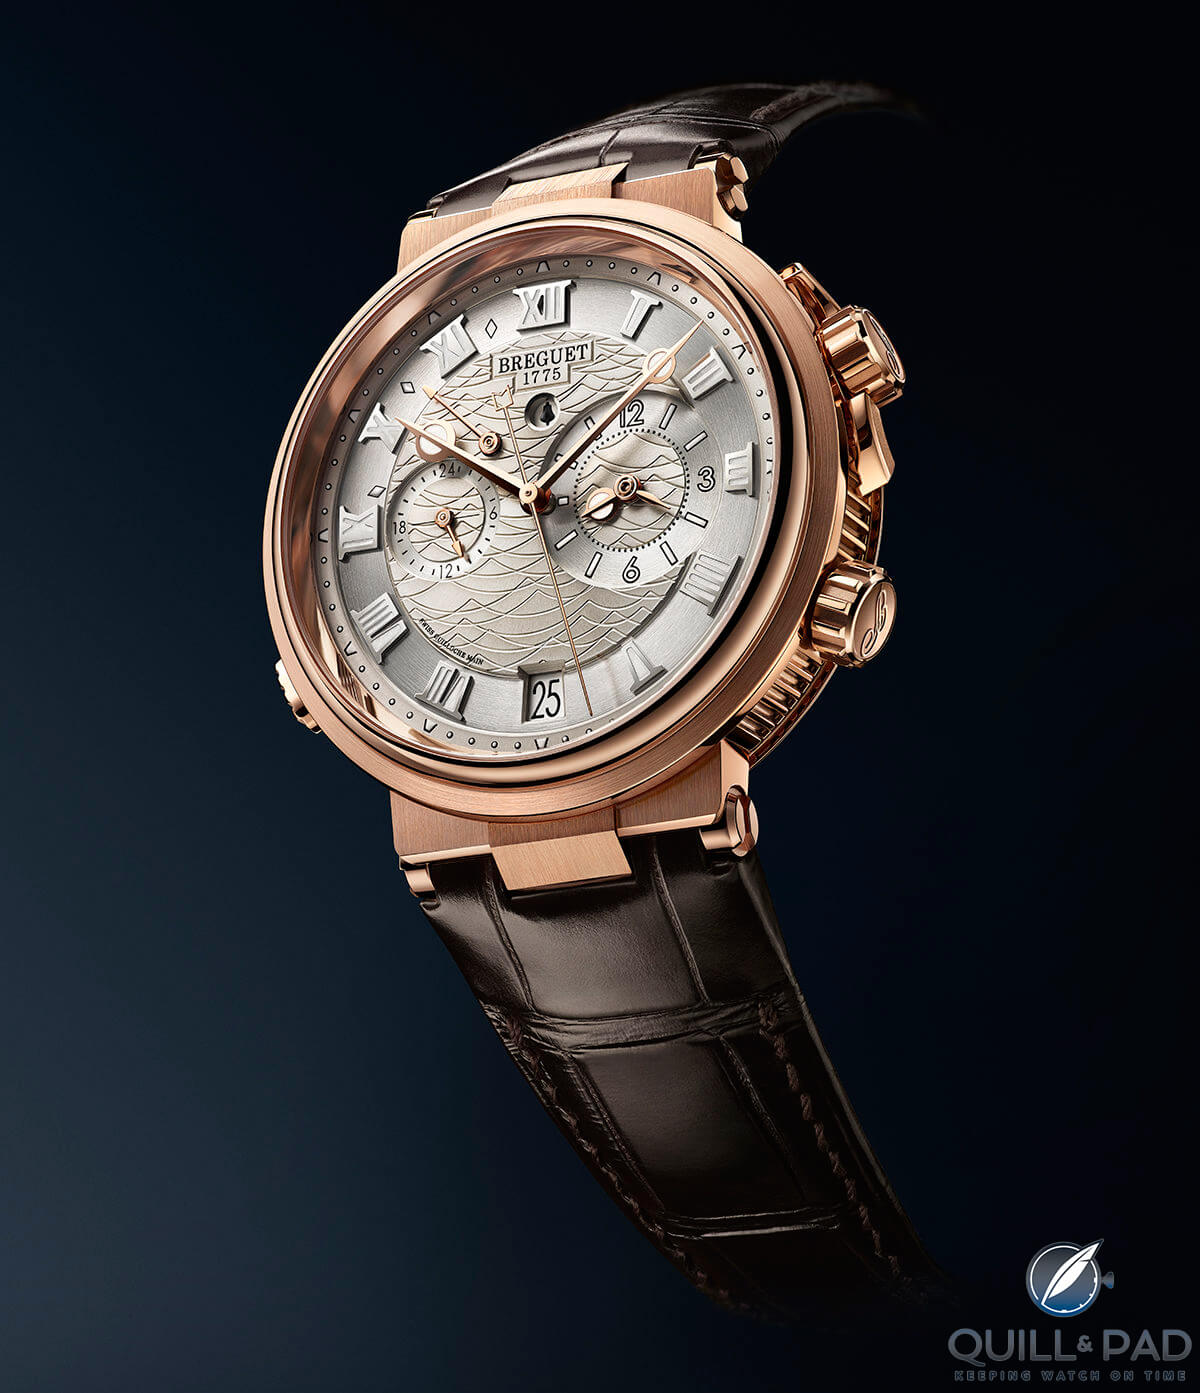 Breguet Marine Alarme Musicale 5547 in pink gold